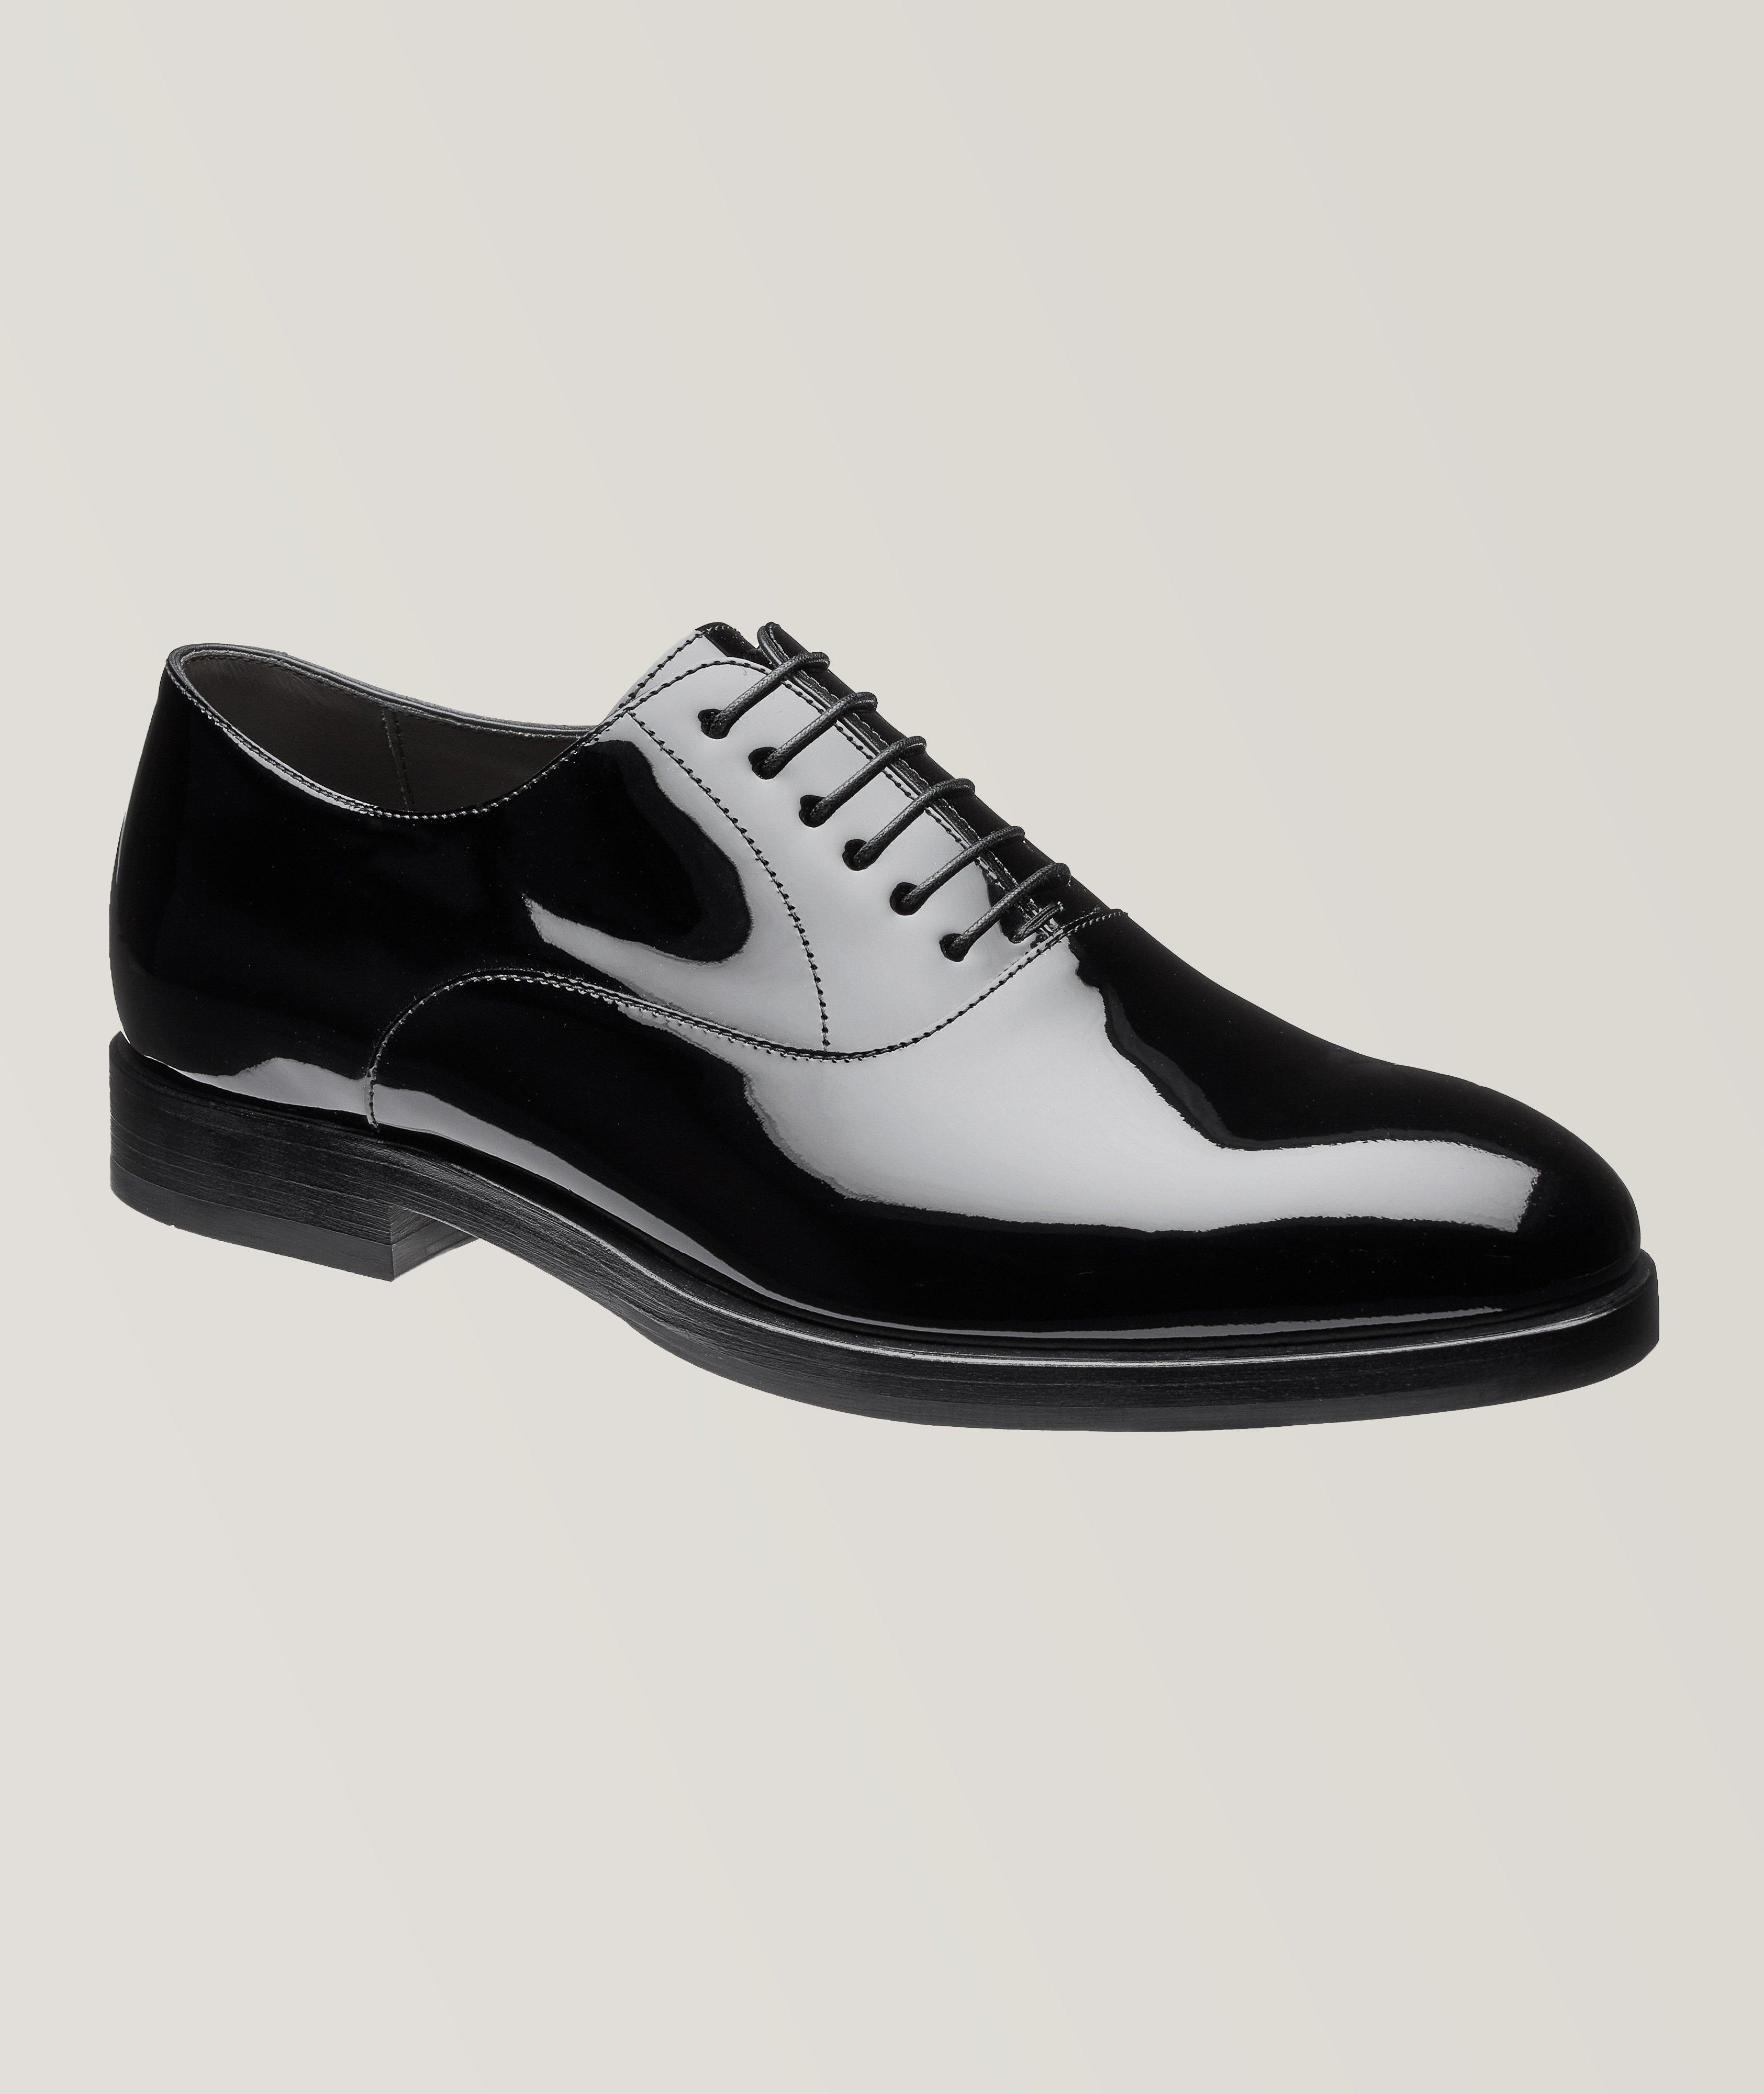 Patent Calfskin Leather Oxfords image 0